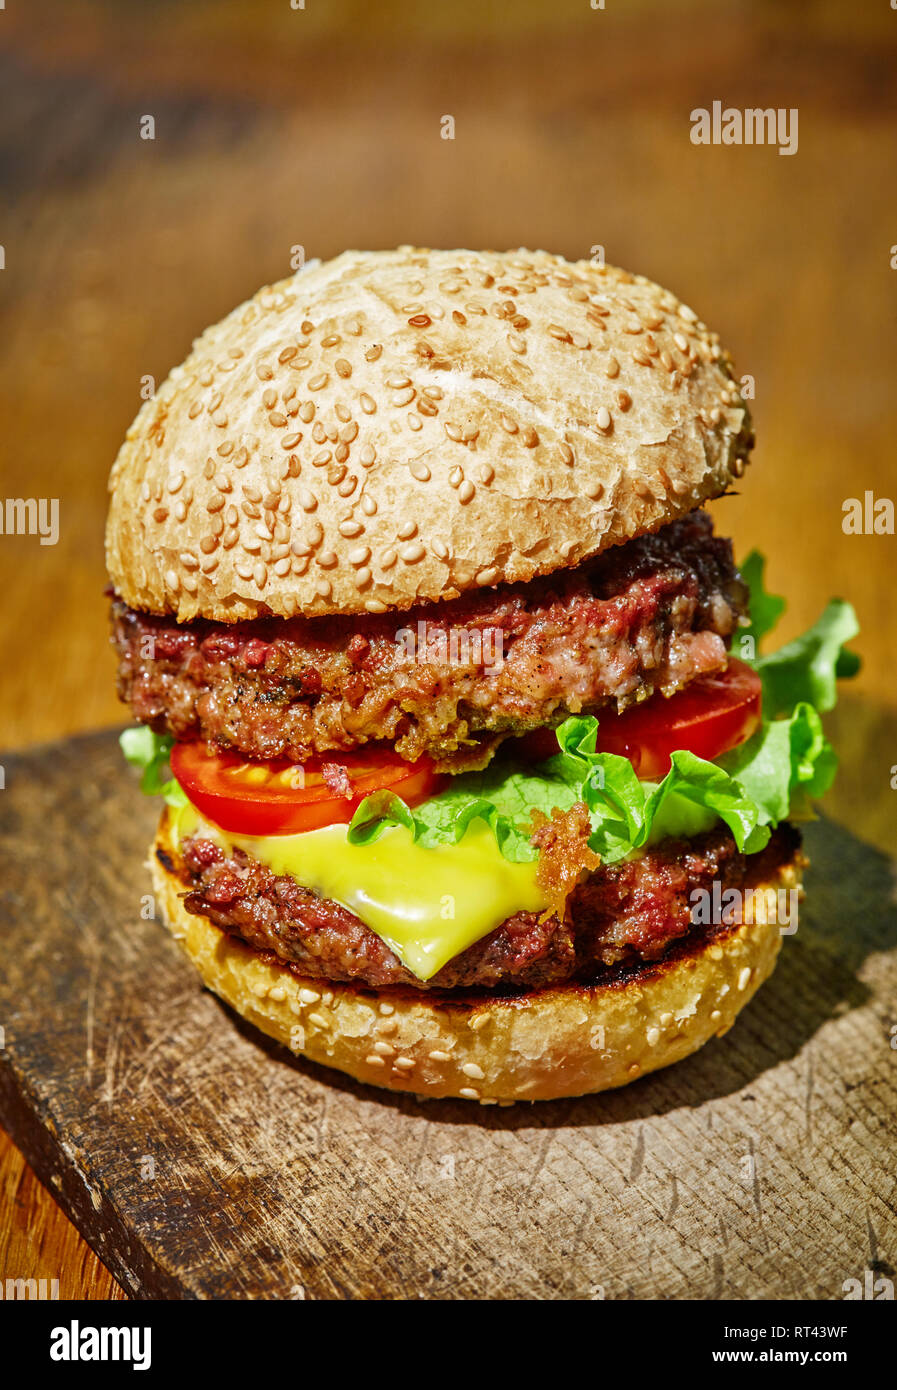 Hamburger with beef, cheese and vegetables on rustic wood background Stock Photo